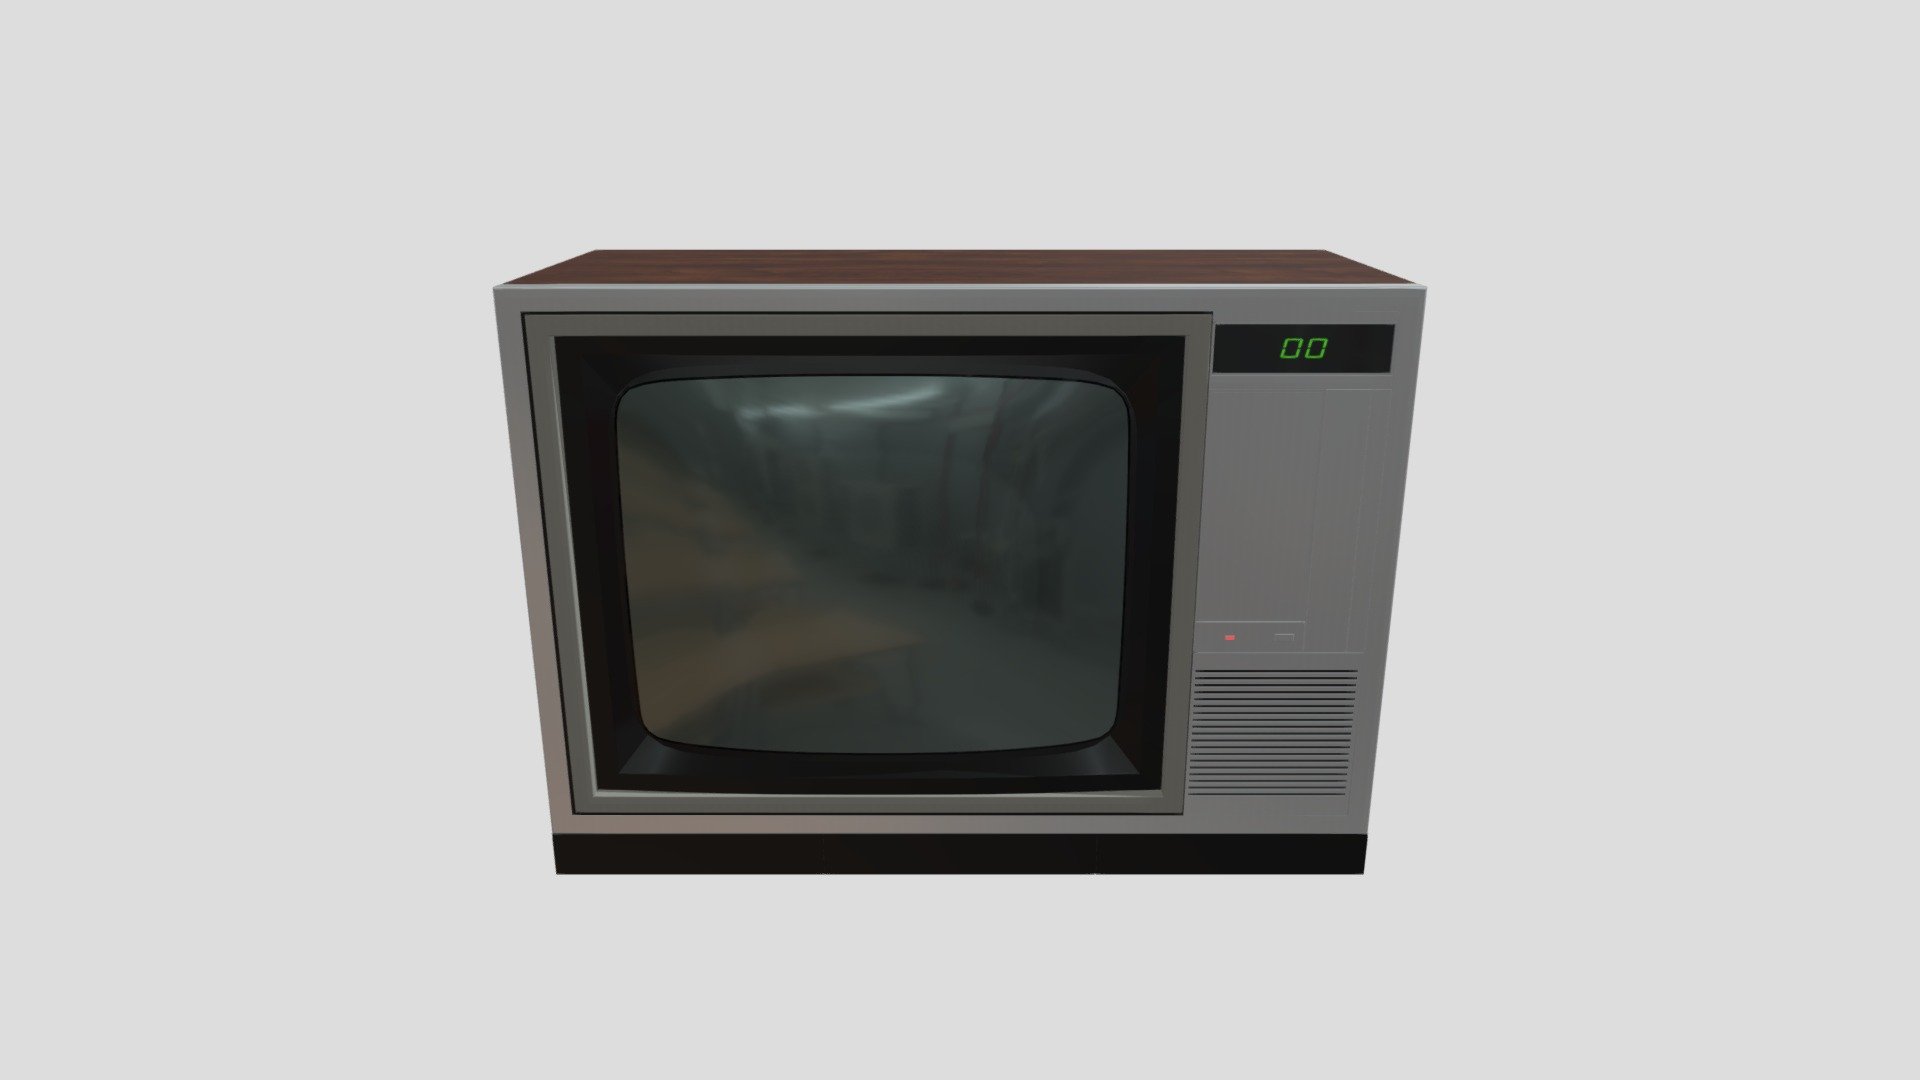 || PRODUCT DESCRIPTION ||
- Originally created with Maya 2017

|| USAGE ||
- This template is an accurate representation of an old 80's TV with zoom

|| SPECIFICATIONS ||
- This template contains 23 separate objects.
- This model contains 29,386 polygons and 30,131 vertices with the subdivision

|| PRESENTATION IMAGES ||
-All preview images are rendered with Vray
- No composition editor used, the product is ready to be rendered. Light and camera are included in the file.

|| TEXTURES ||
-Resolution of textures 2048 x 2048 pixels. There are diffusion maps
-All textures are created from original photographs or drawings 3d model